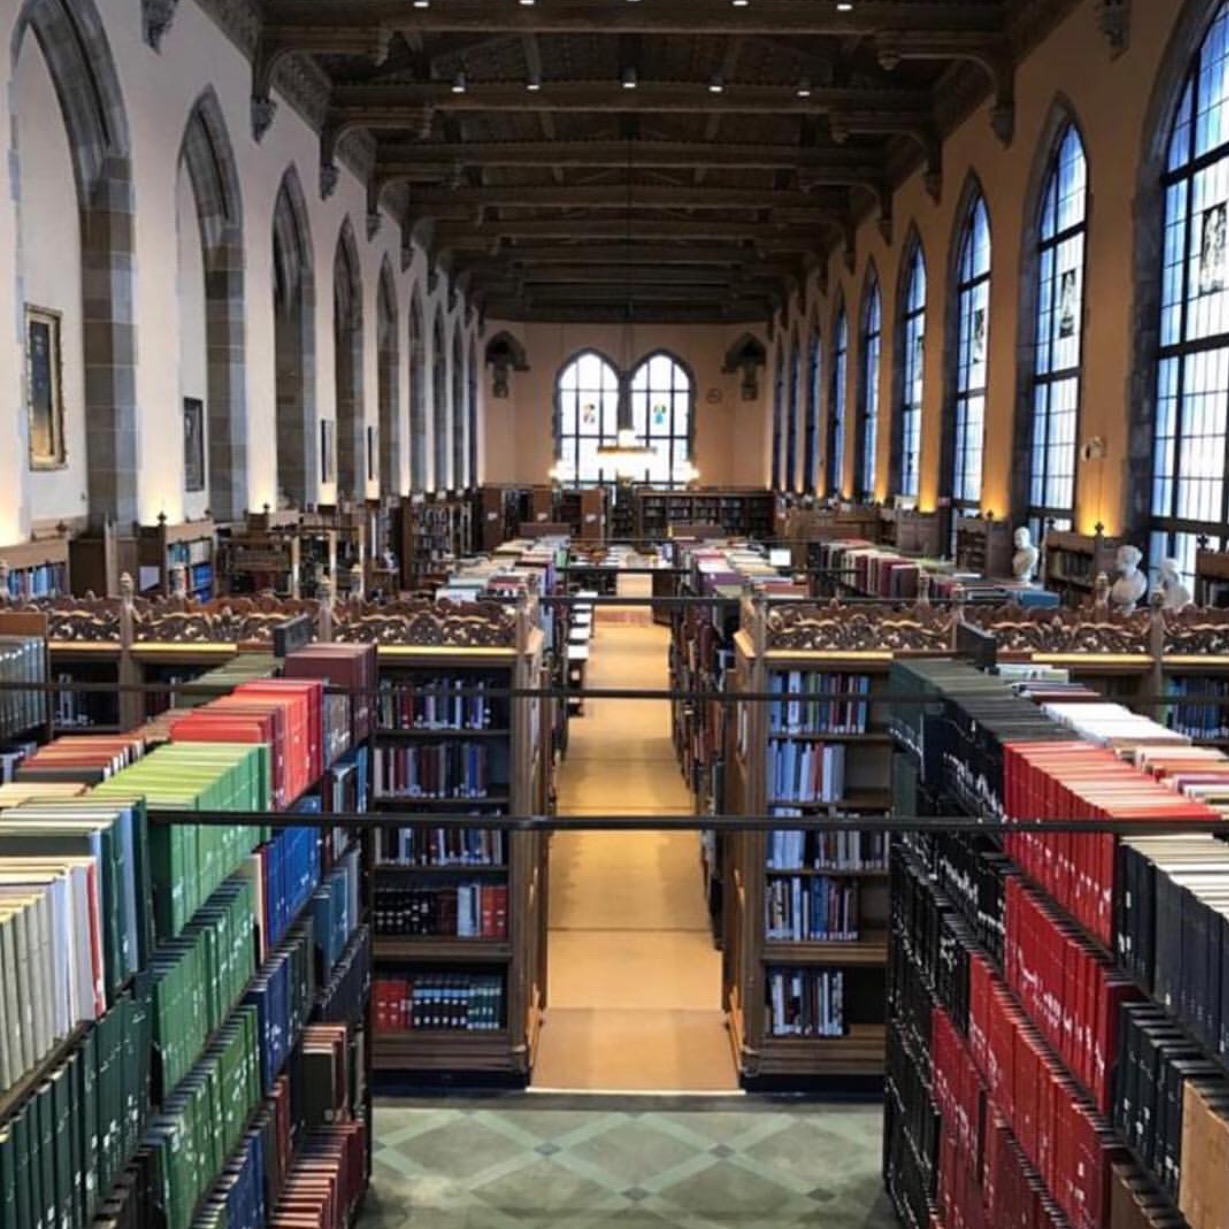 Aisles of books in Deering Library